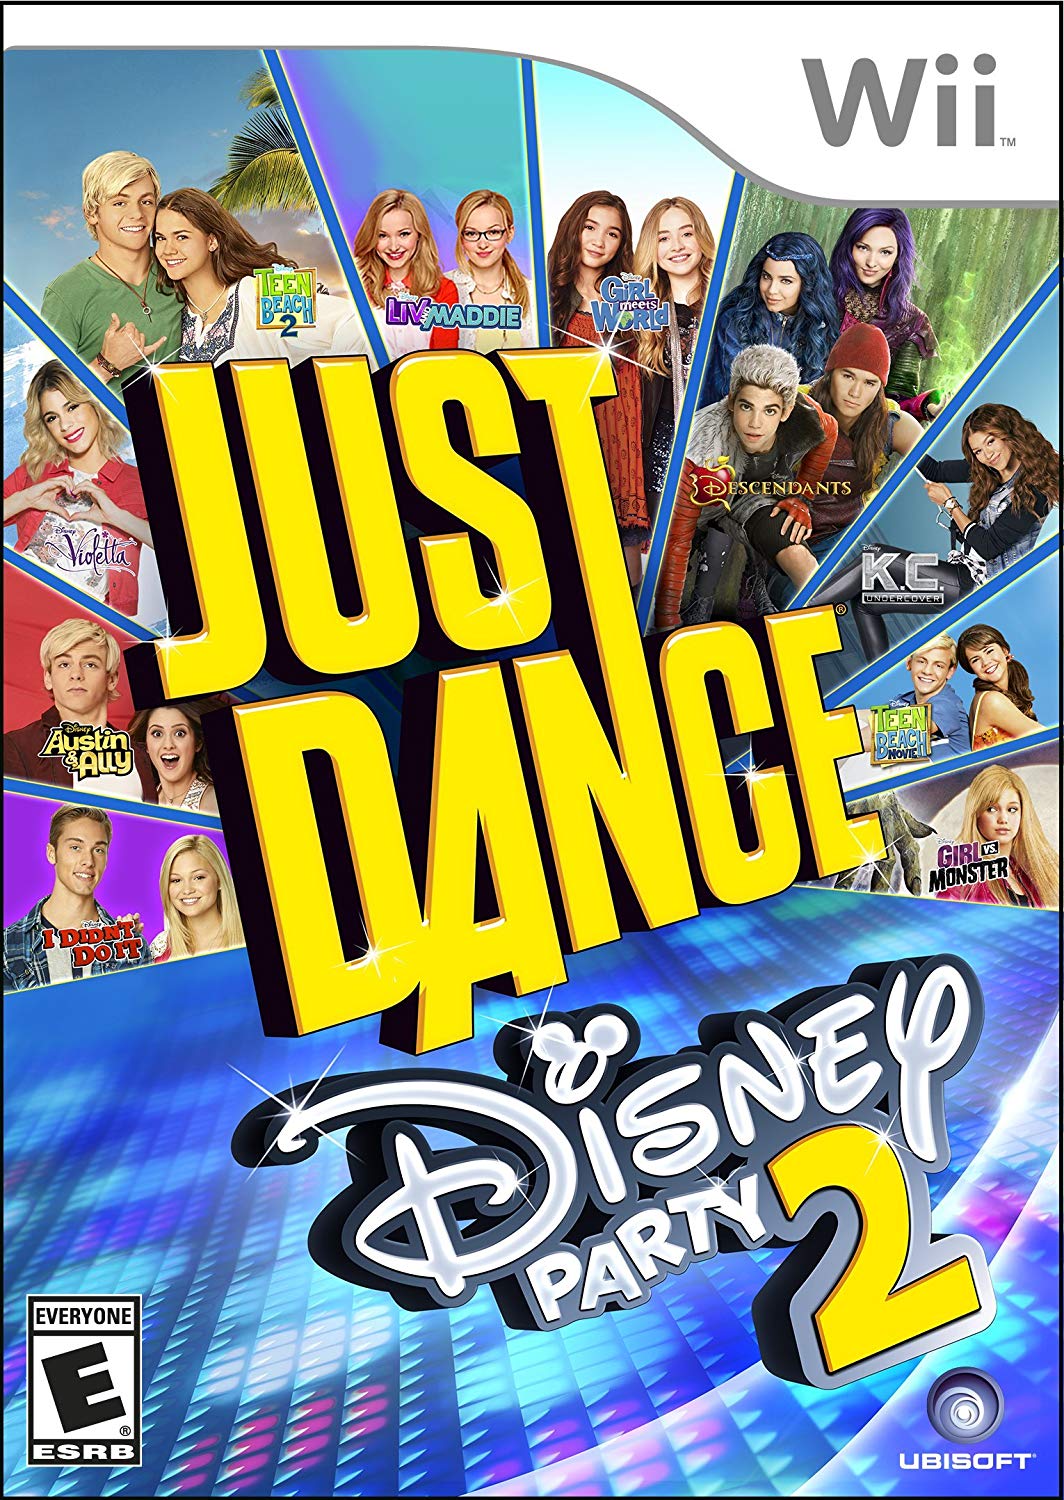 WII: JUST DANCE DISNEY PARTY 2 (COMPLETE)